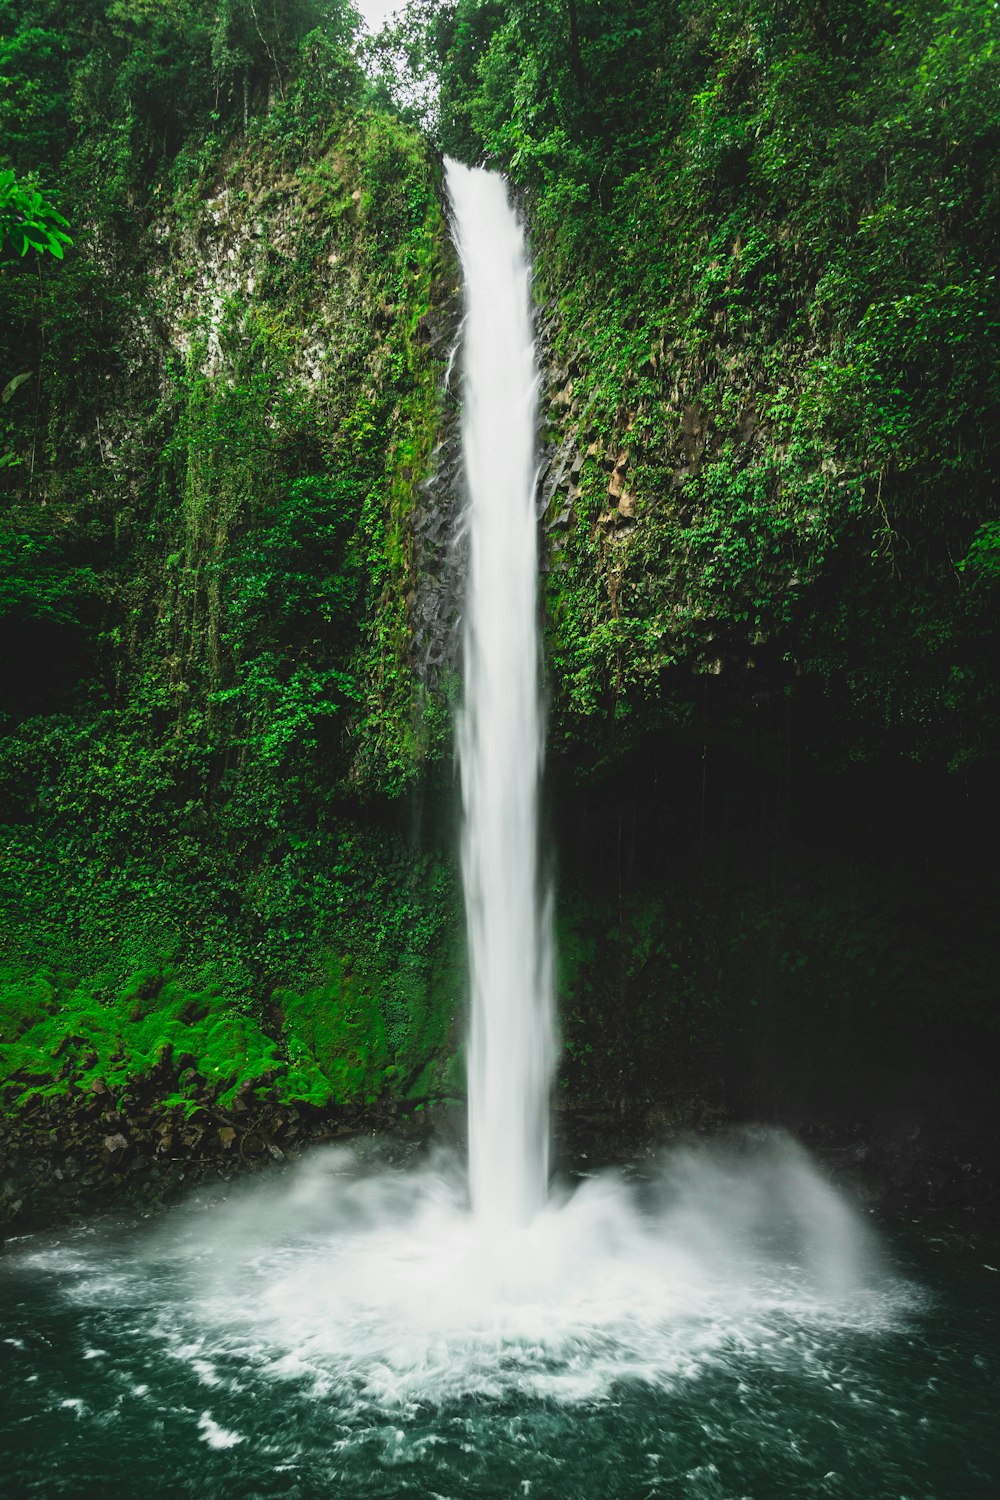 water falls in the middle of green trees